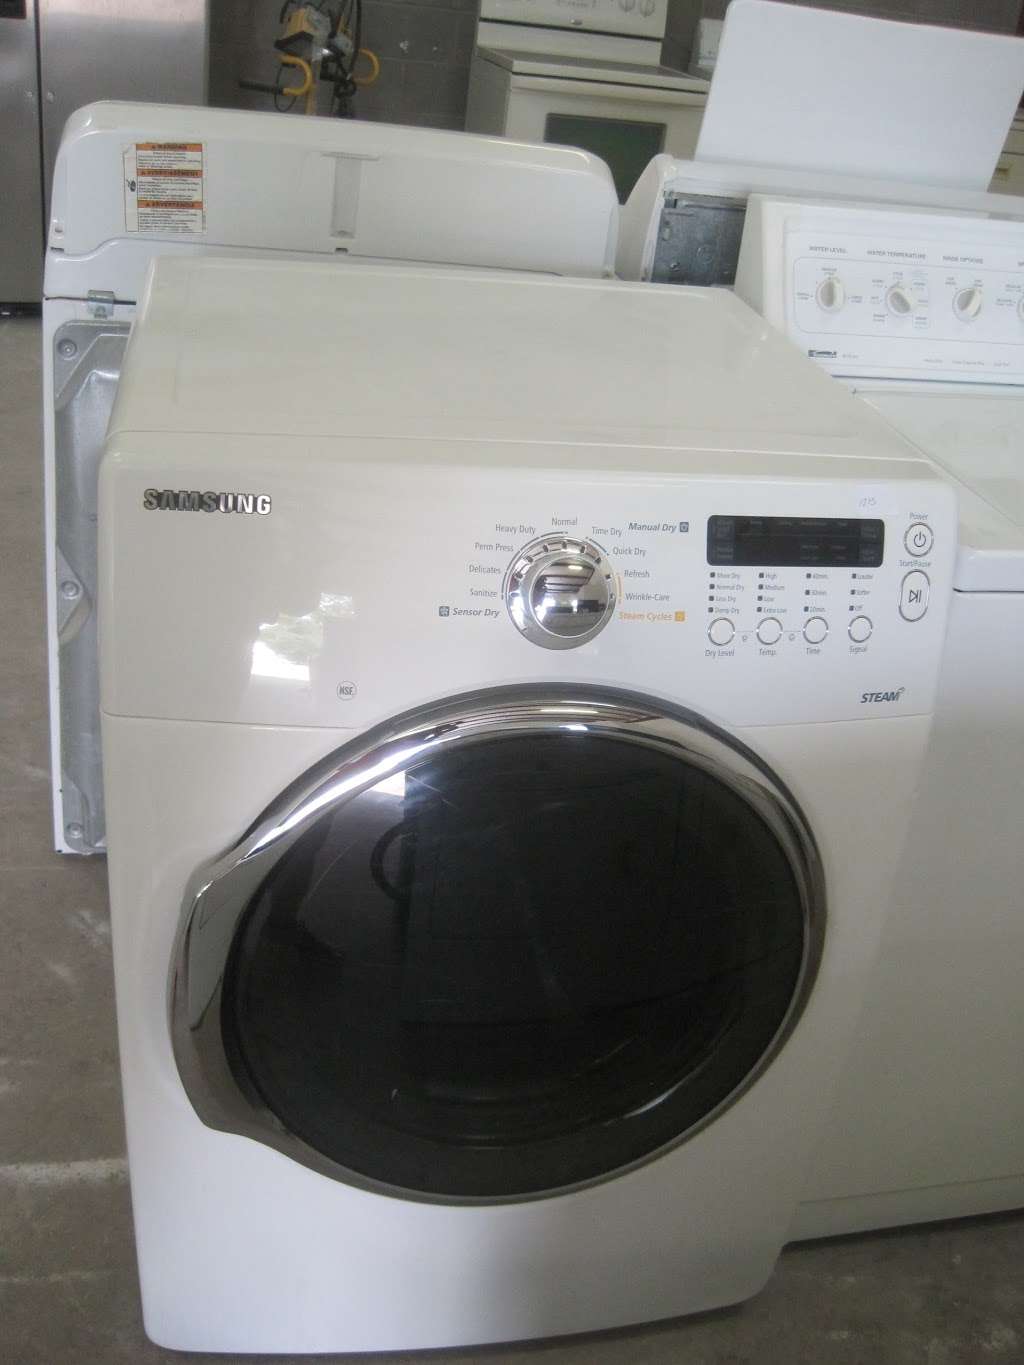 Quality Used Appliances | Photo 4 of 10 | Address: 7590 E Hwy 25, Belleview, FL 34420, USA | Phone: (352) 434-2204